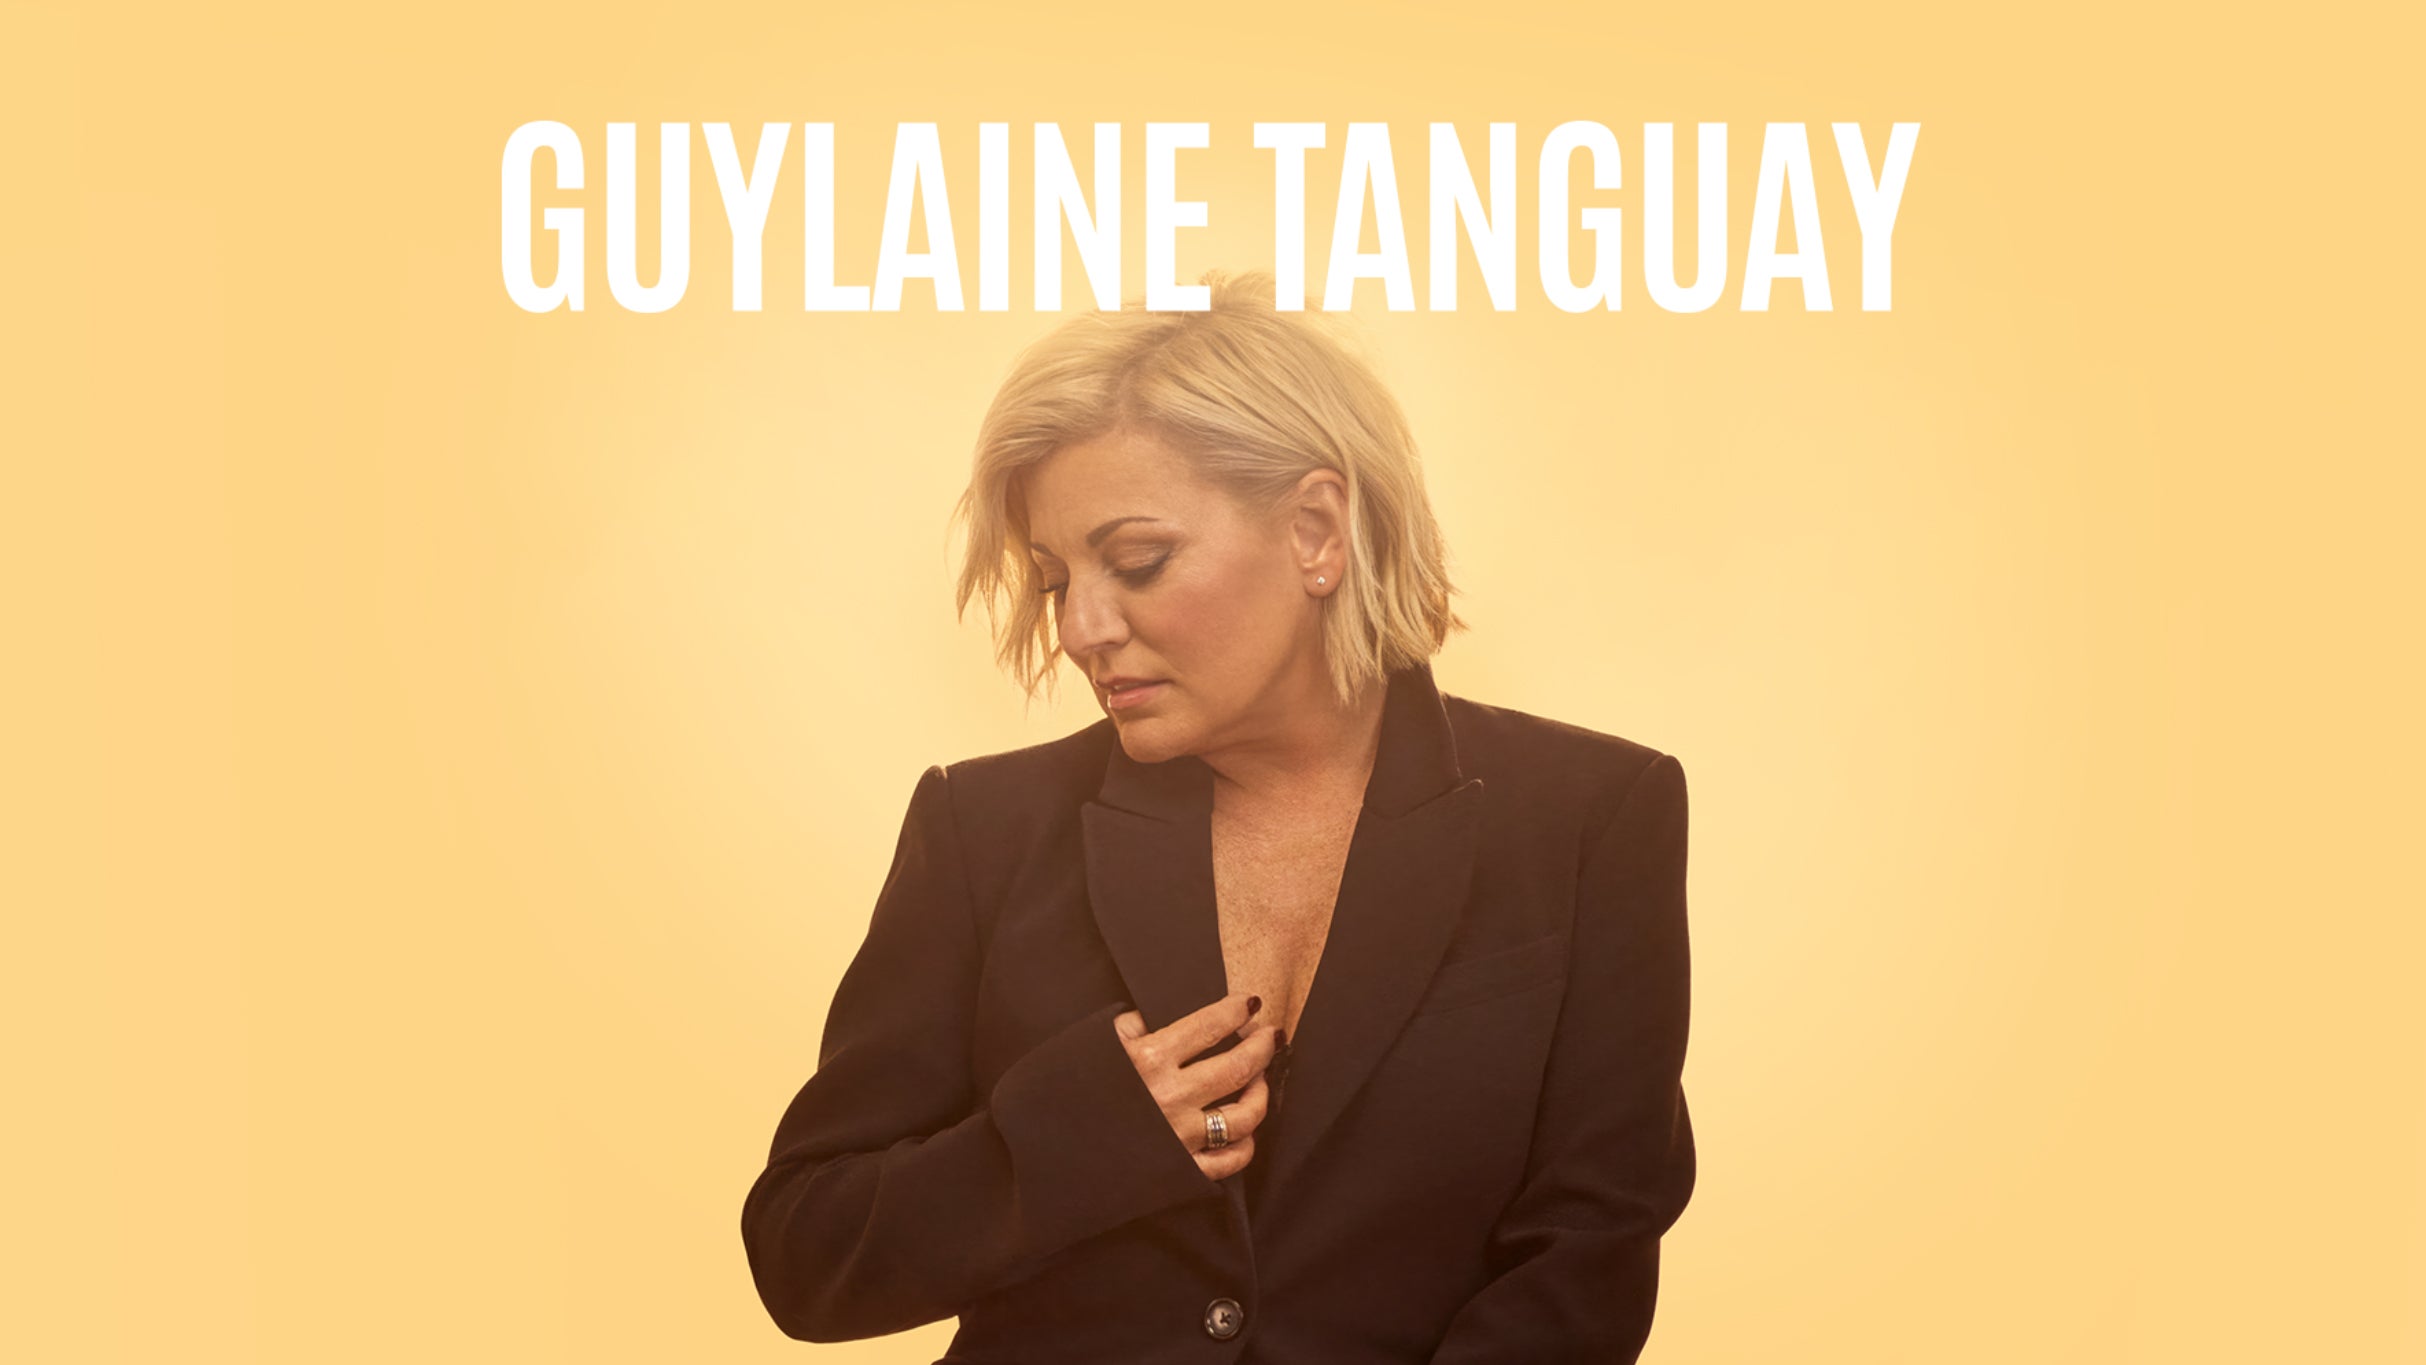 Guylaine Tanguay in Montreal promo photo for 2eA50 presale offer code